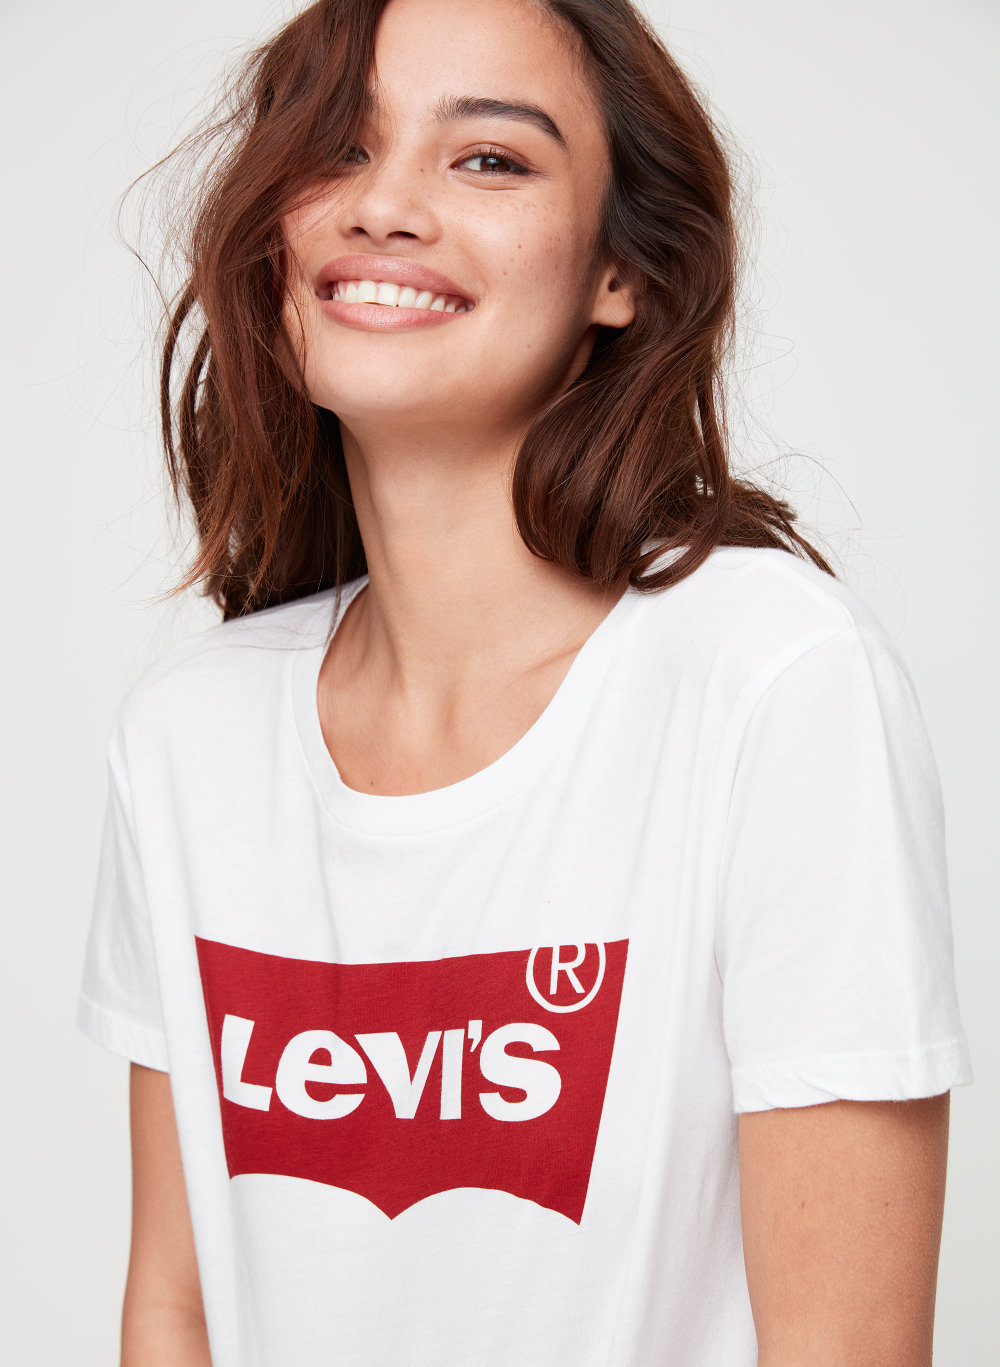 levi's the perfect t shirt